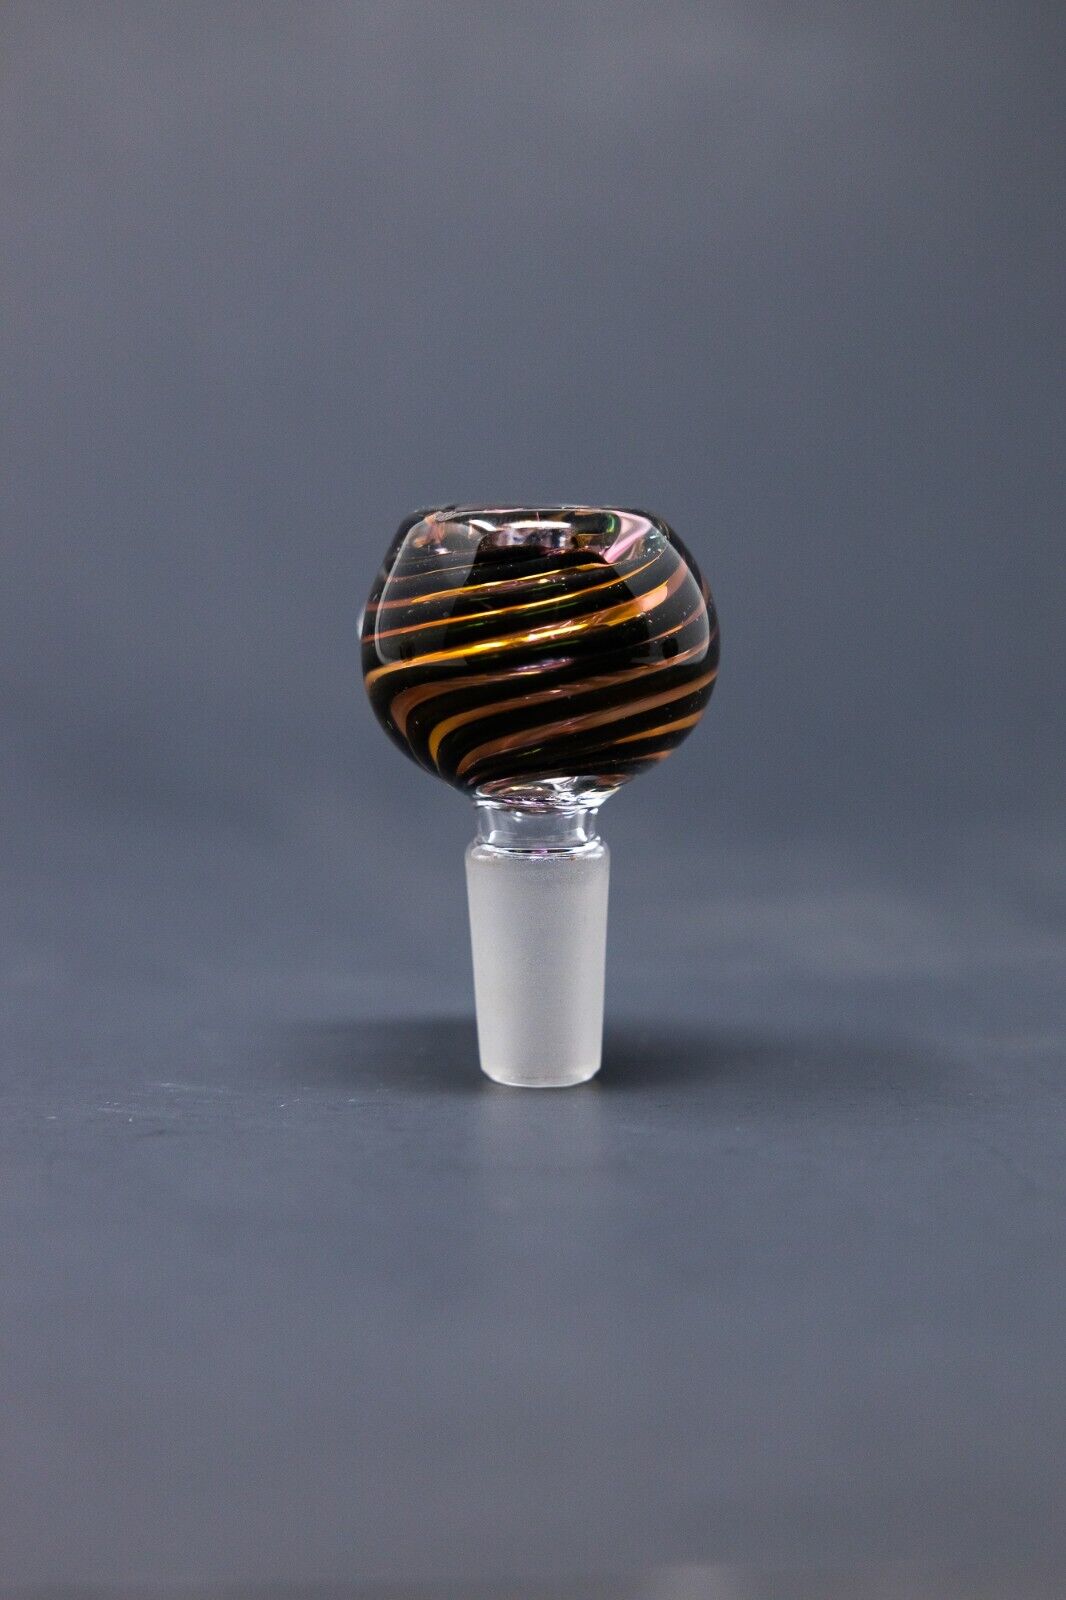 14MM Black Swirl Thick Glass Tobacco Hookah Water Pipe Bong Bowl - Fast Shipping. Available Now for 10.99